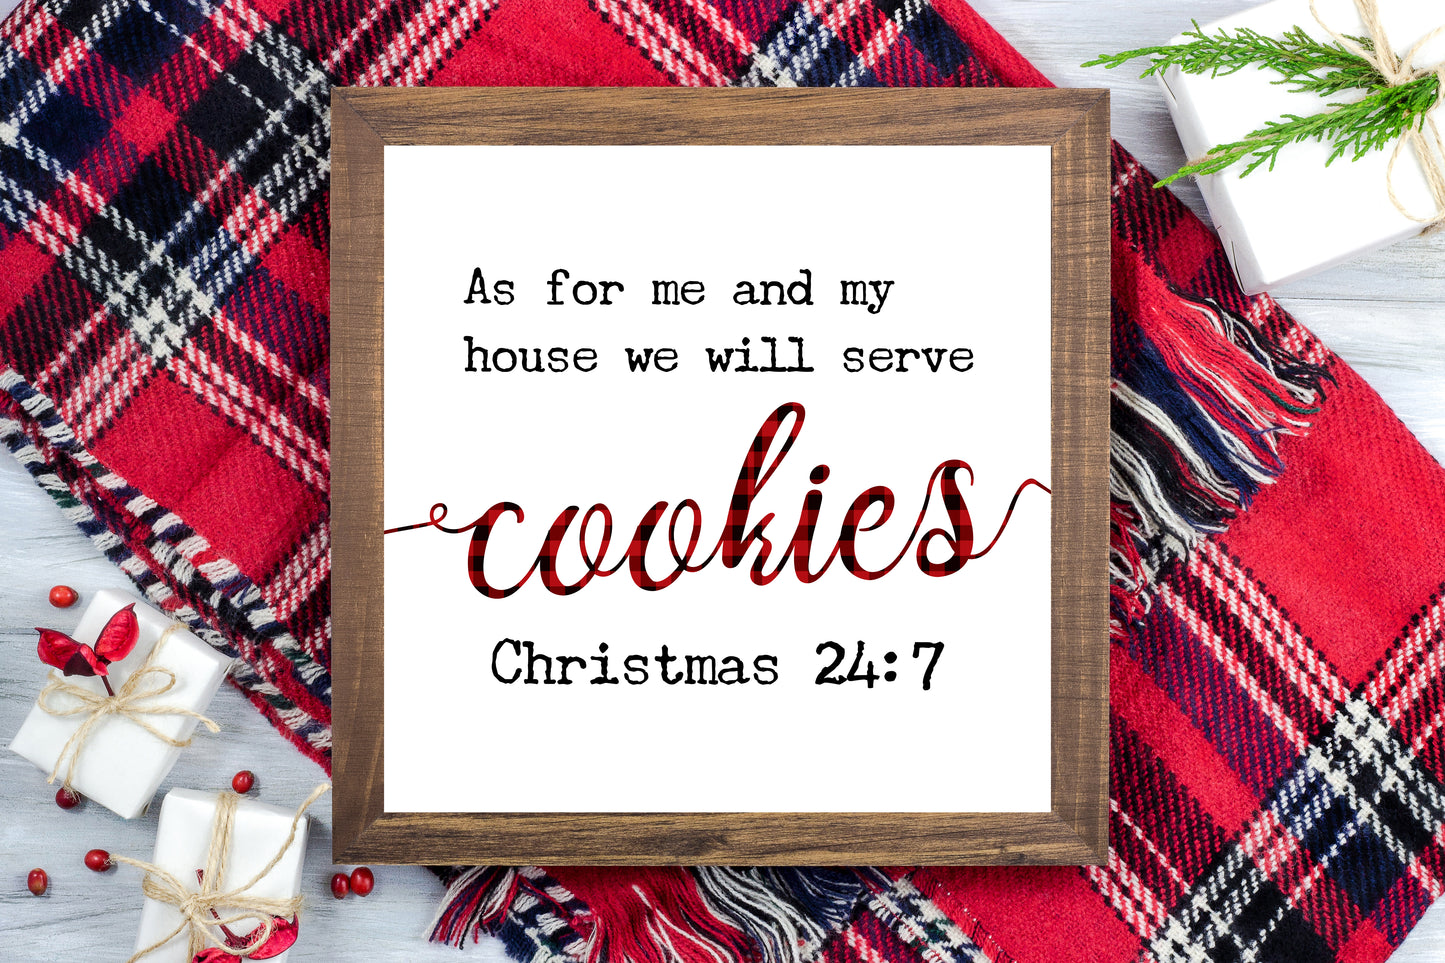 As for me and my house we will serve cookies Christmas 24:7 -  Christmas Printable Sign Farmhouse Style  - Digital File